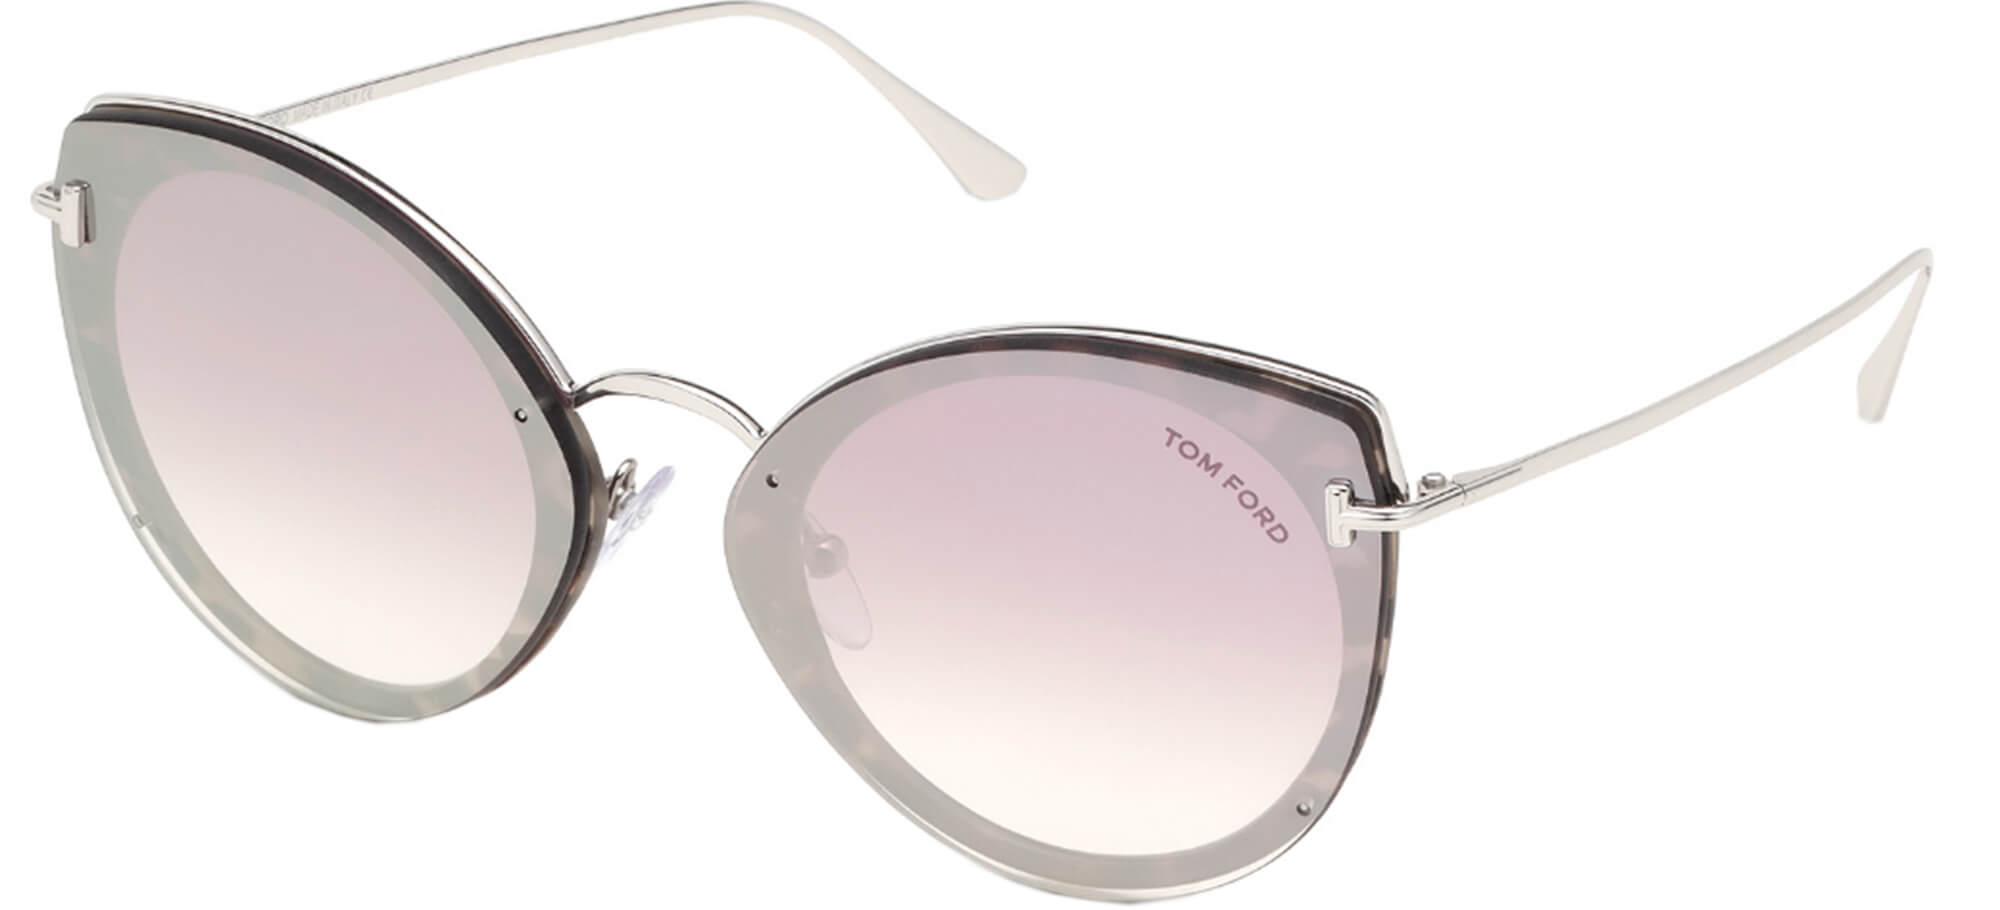 Tom FordJESS FT 0683Silver/red Shaded (55Z G)